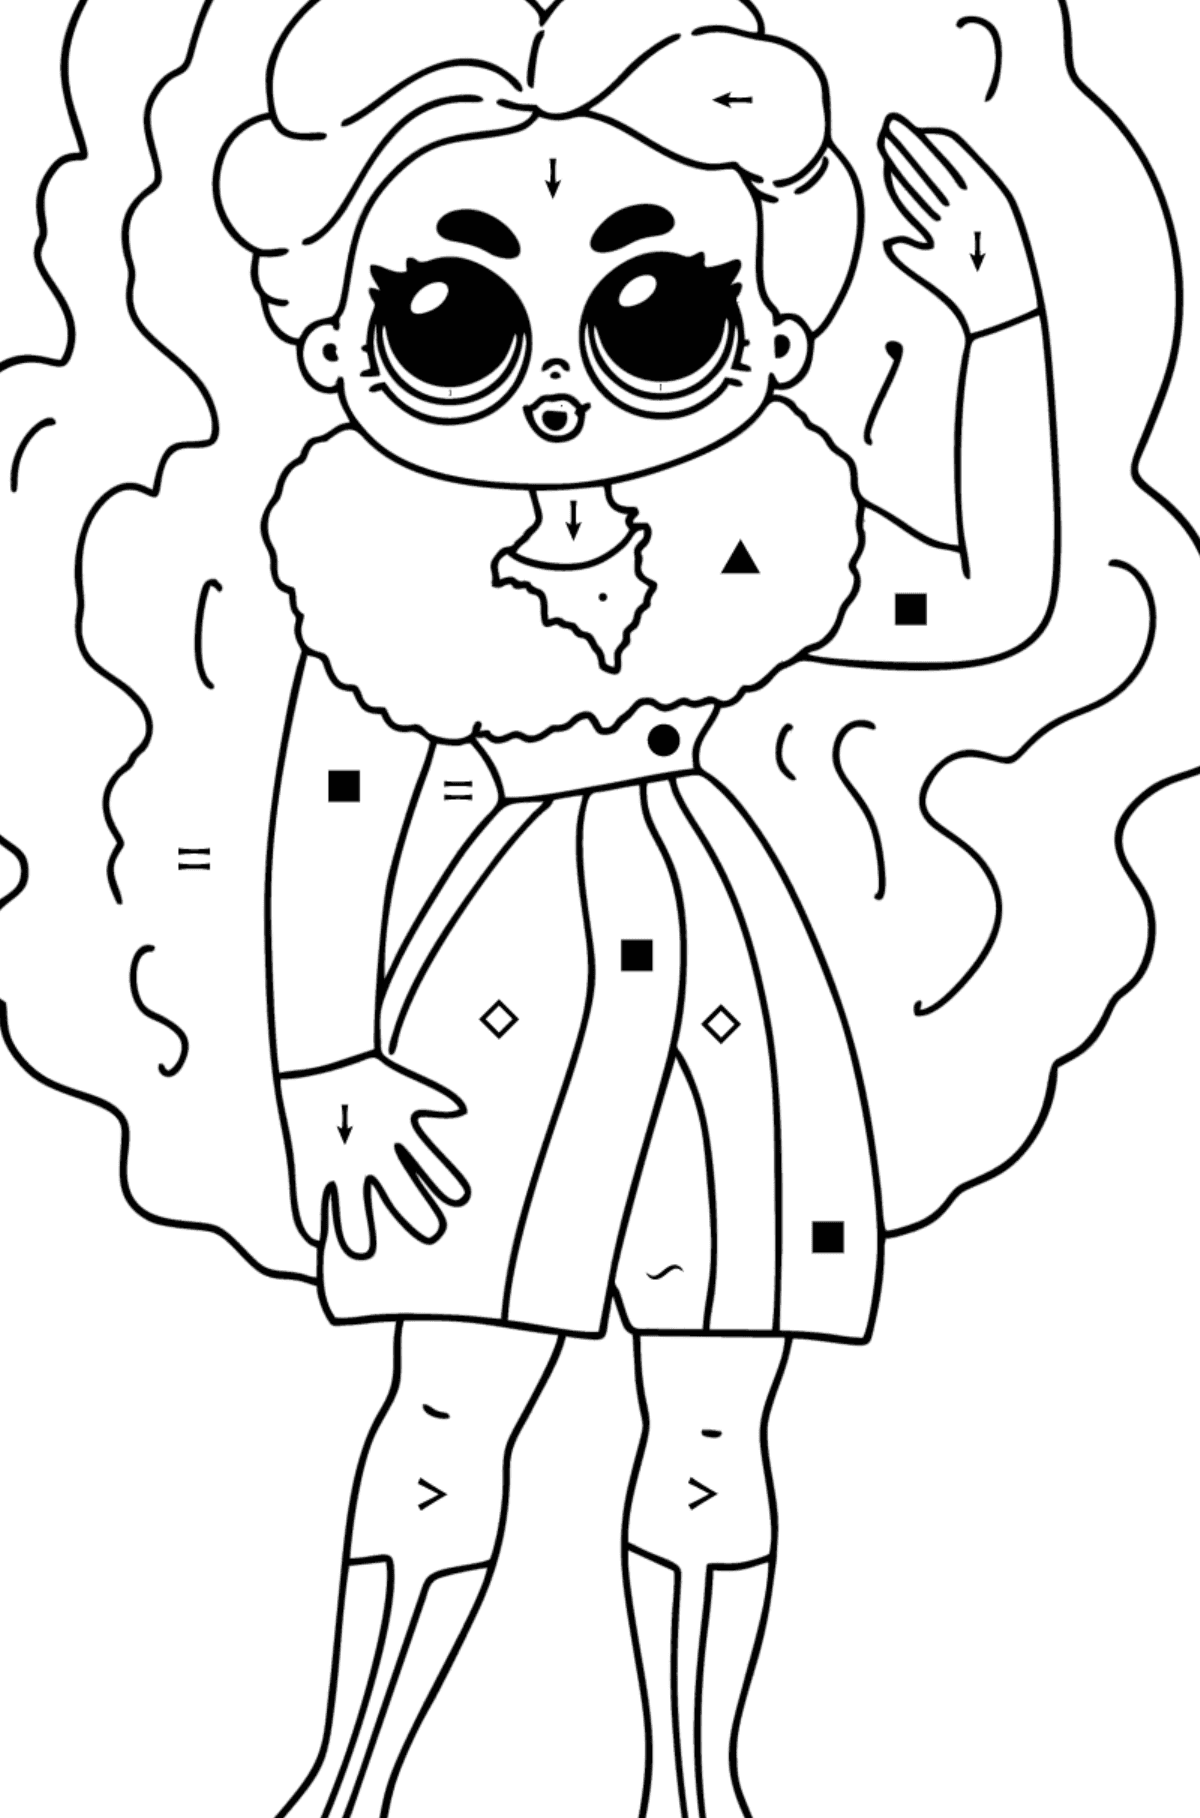 Coloring page LOL OMG Cute Girl - Coloring by Symbols for Kids